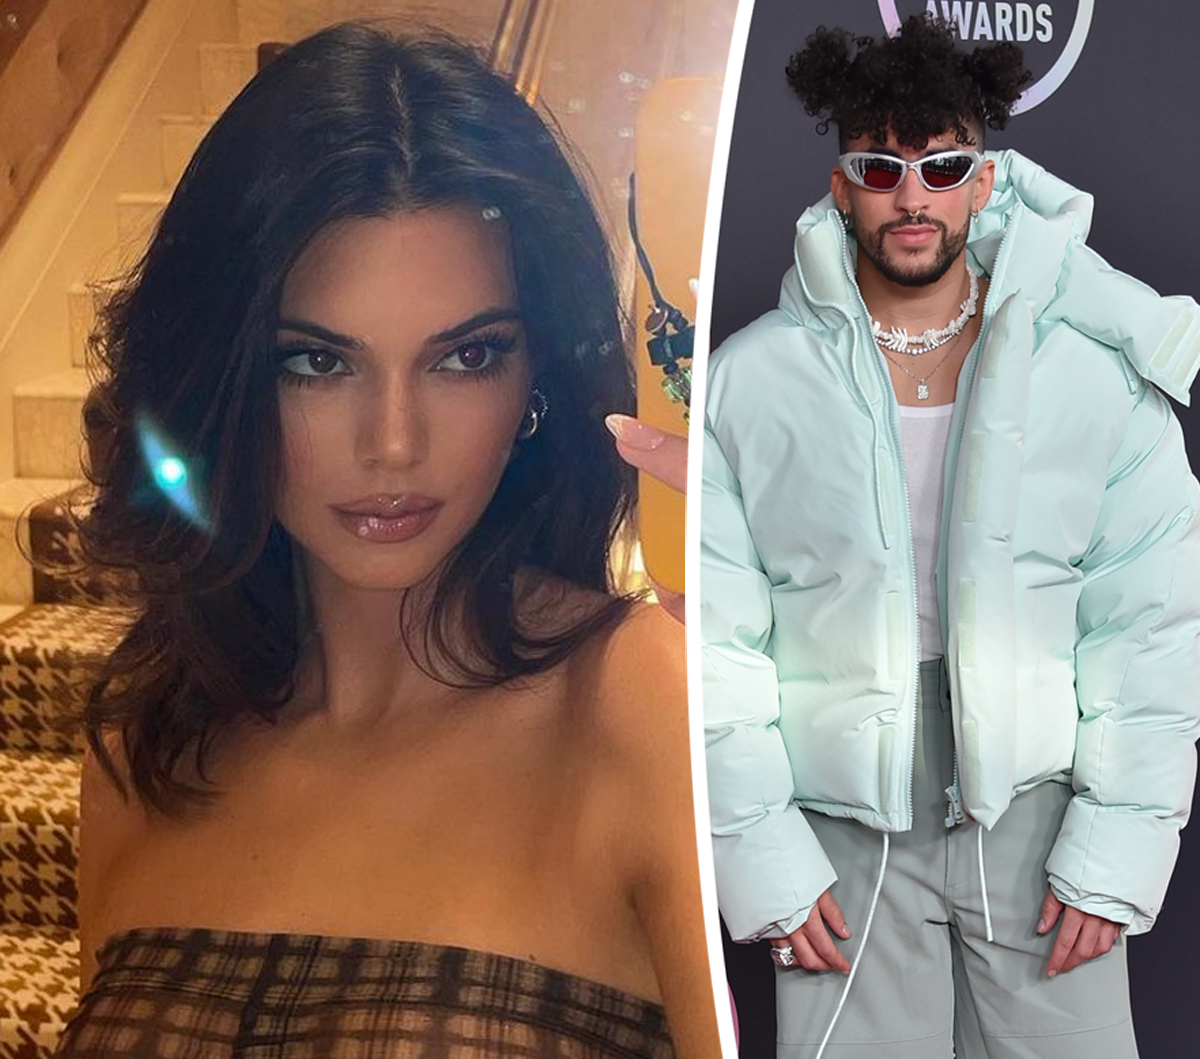 #Kendall Jenner & Bad Bunny Spotted At Same Restaurant Amid Romance Rumors!